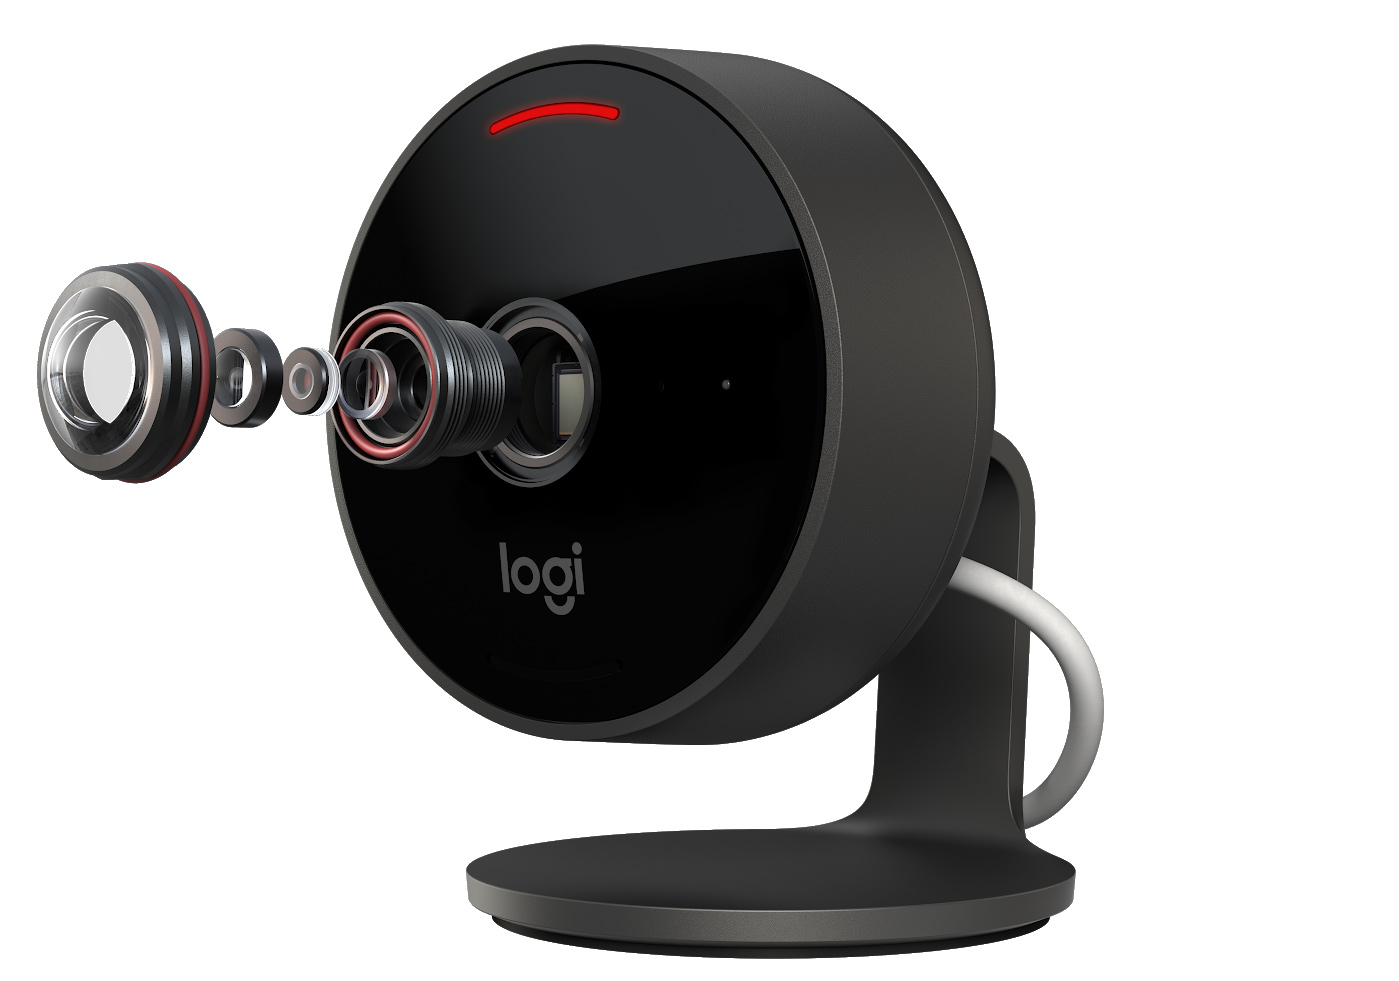 Logitech Launches New Circle View Camera With Homekit Secure Video Support Laptrinhx